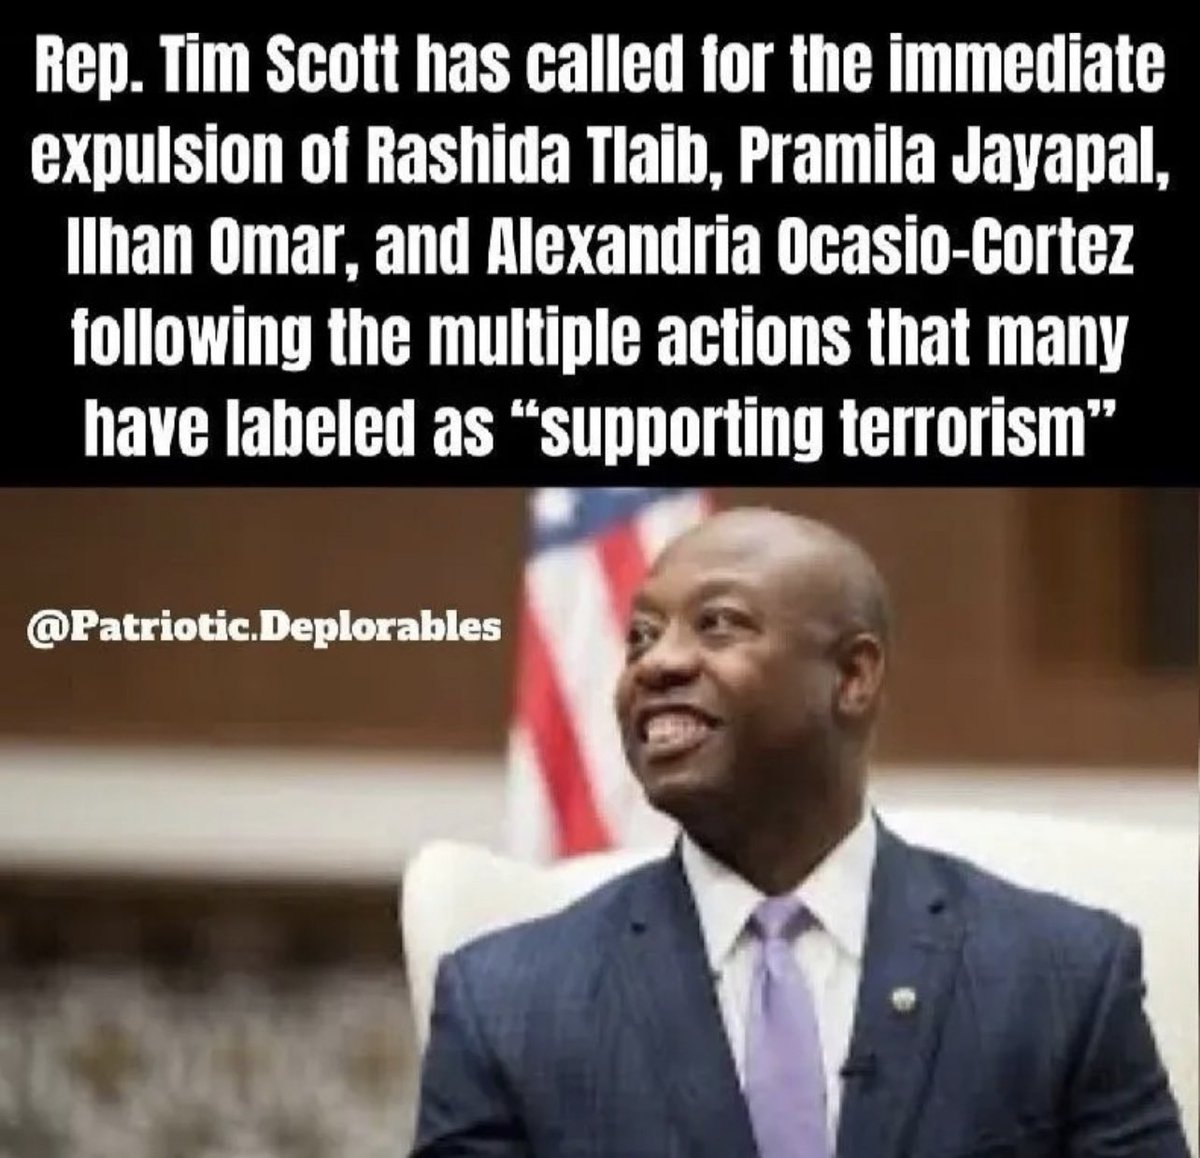 “…. any member of Congress who gives one ounce of support to terrorist killers should be expelled from office immediately.”   - Tim Scott

Who agrees 100% with Tim Scott? 🙋‍♂️👇